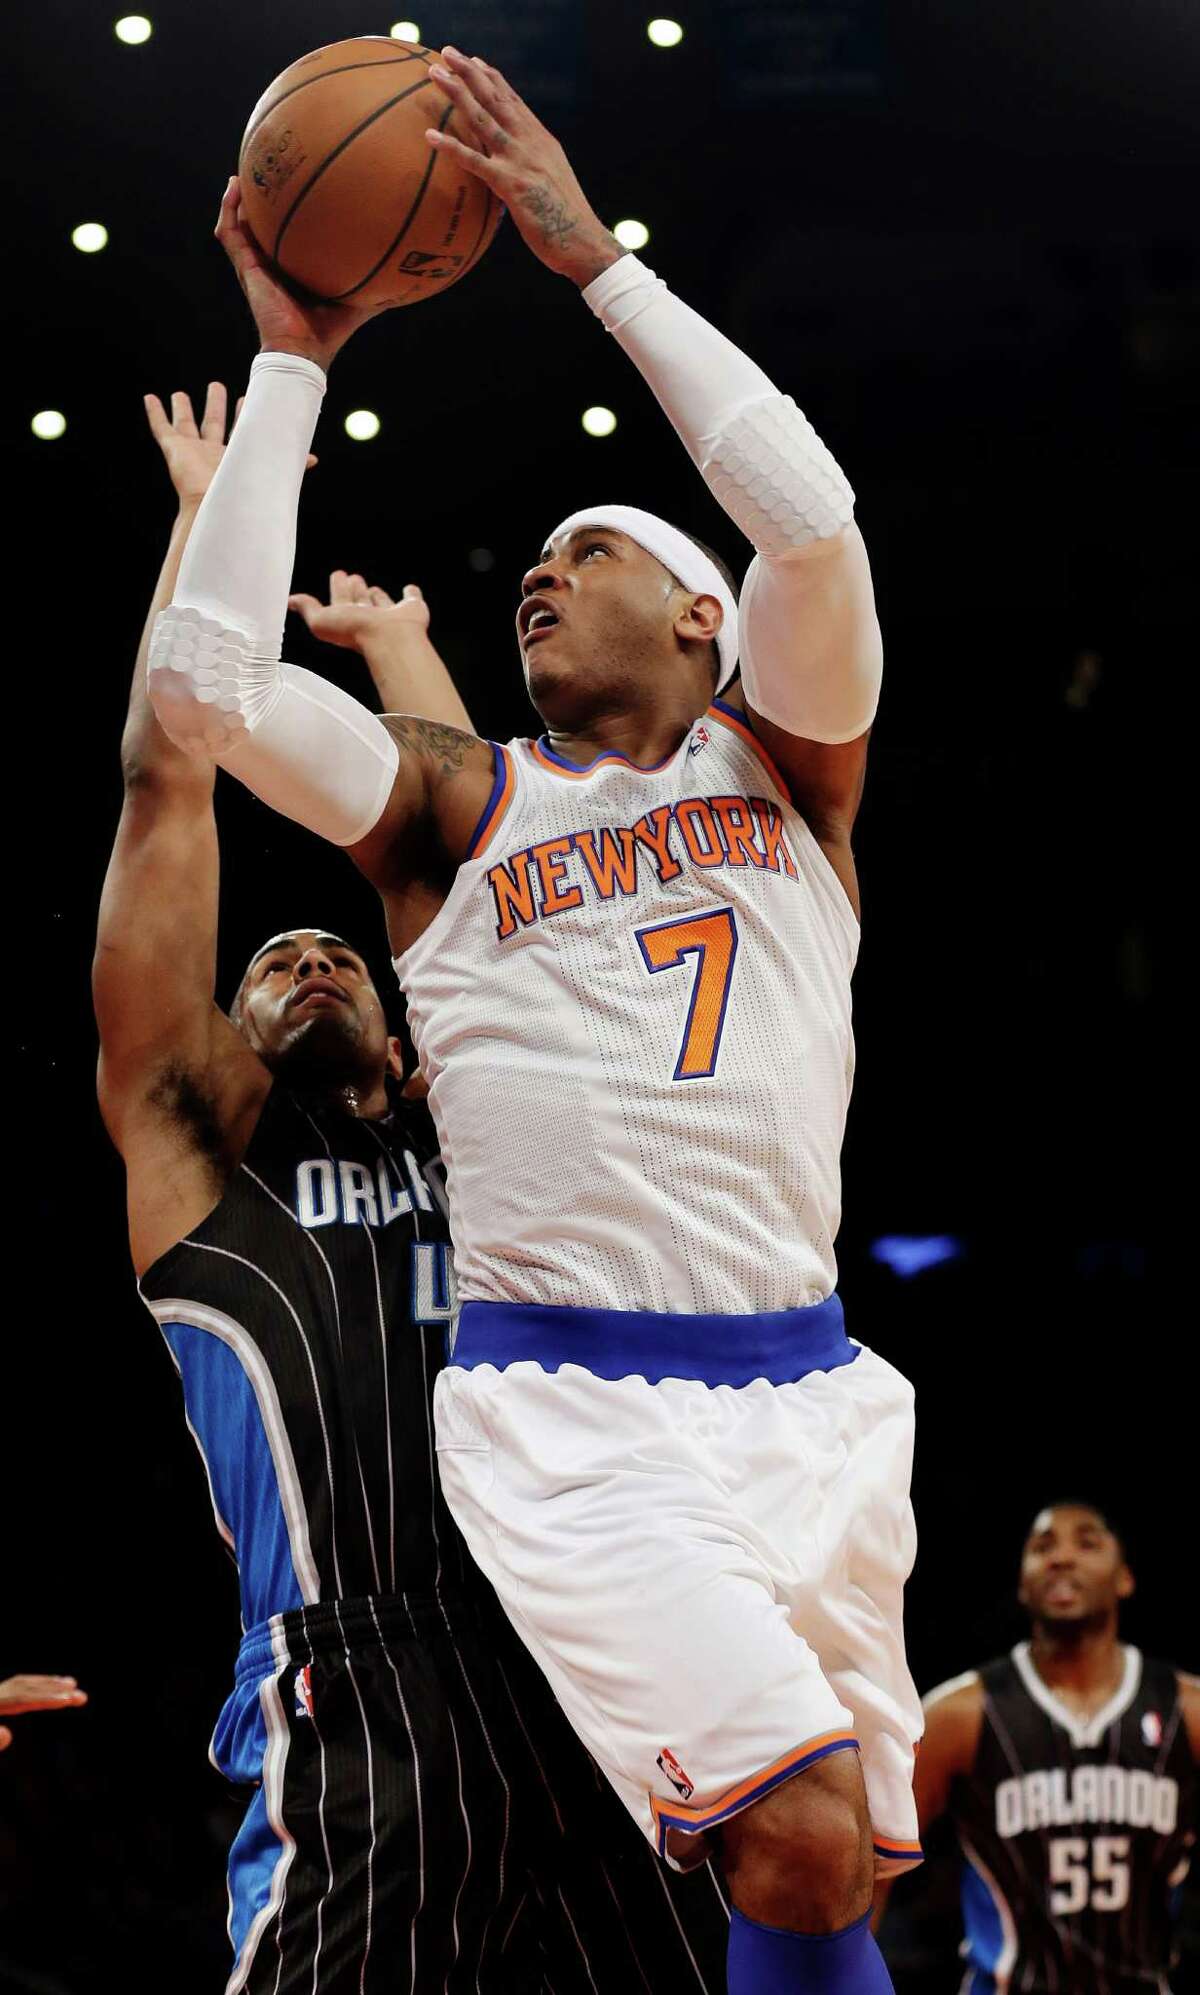 New York Knicks' Carmelo Anthony (7) drives past Orlando Magic's Arron Afflalo (4) during the first half of an NBA basketball game, Wednesday, March 20, 2013, in New York. (AP Photo/Frank Franklin II)